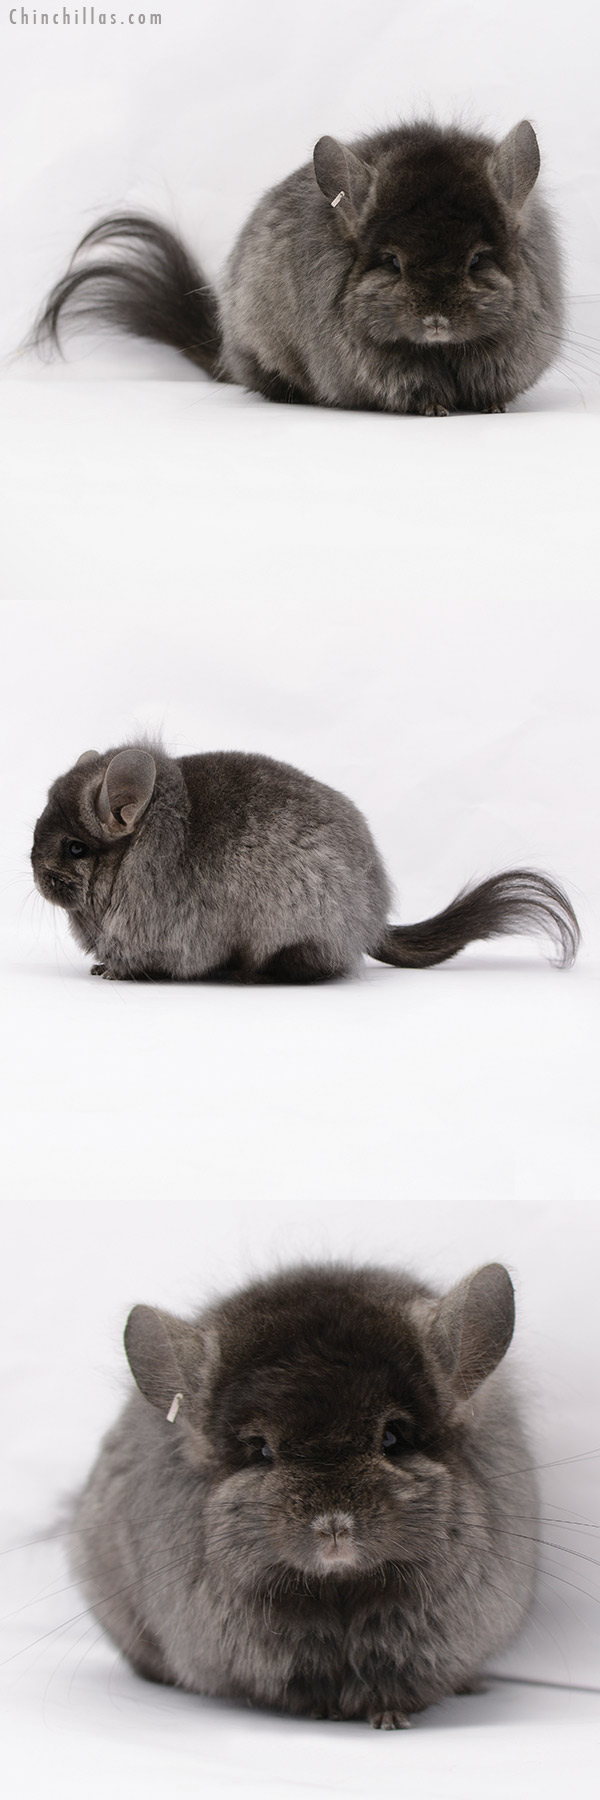 Chinchilla or related item offered for sale or export on Chinchillas.com - 20193 Exceptional Brevi Type Ebony ( Locken Carrier ) G2  Royal Persian Angora Female Chinchilla